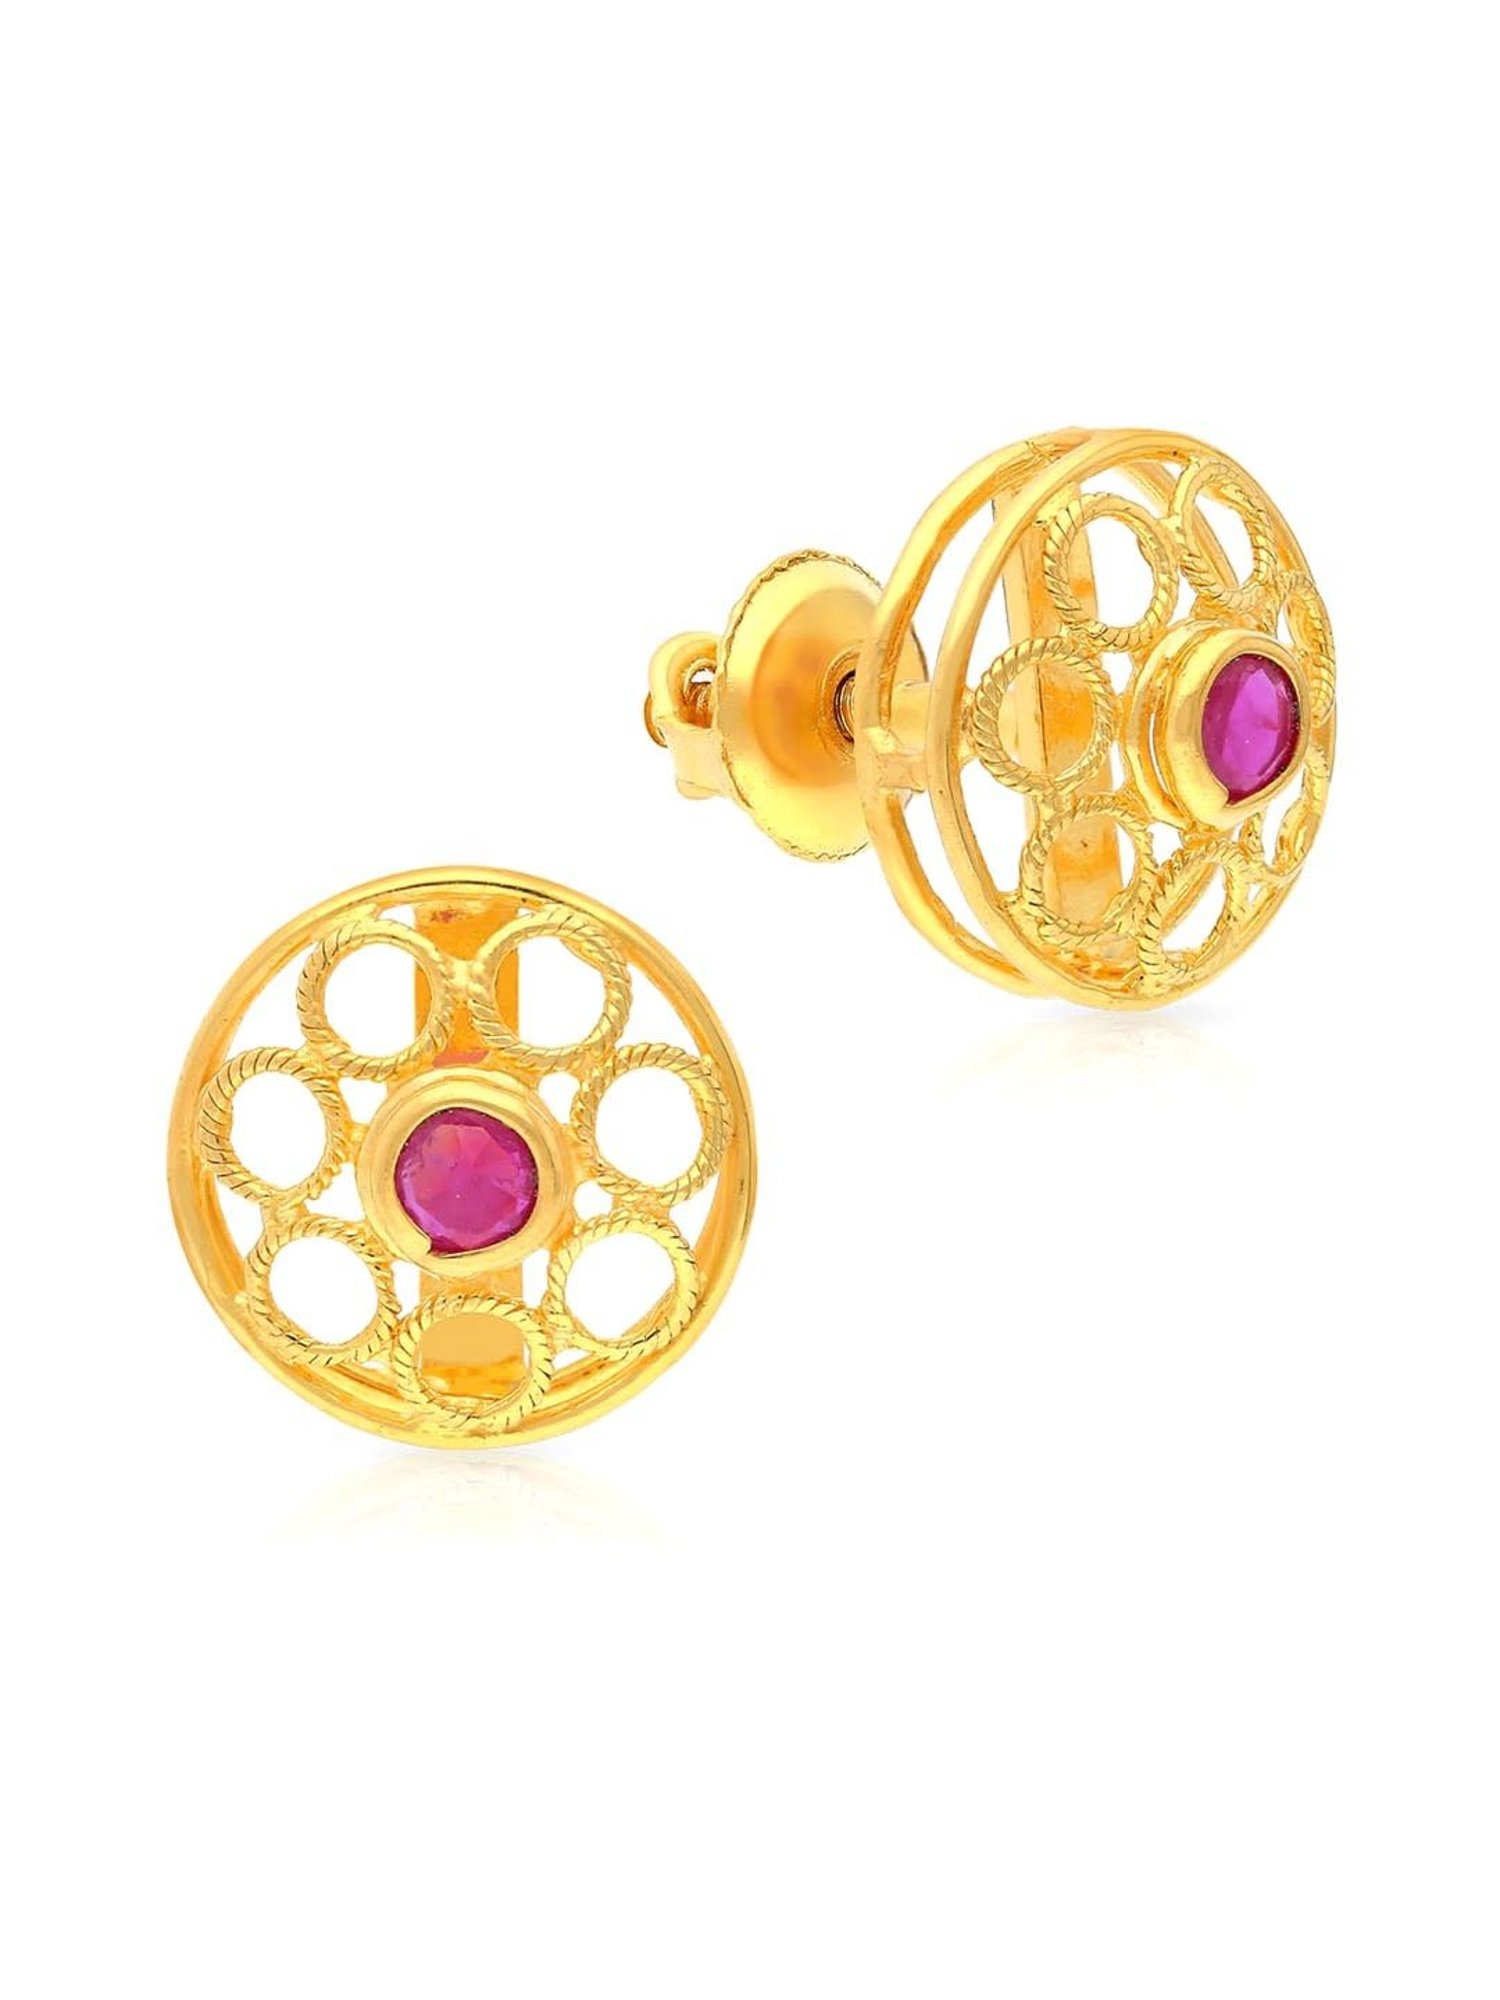 Malabar Gold Stud Earrings in Siliguri - Dealers, Manufacturers & Suppliers  - Justdial